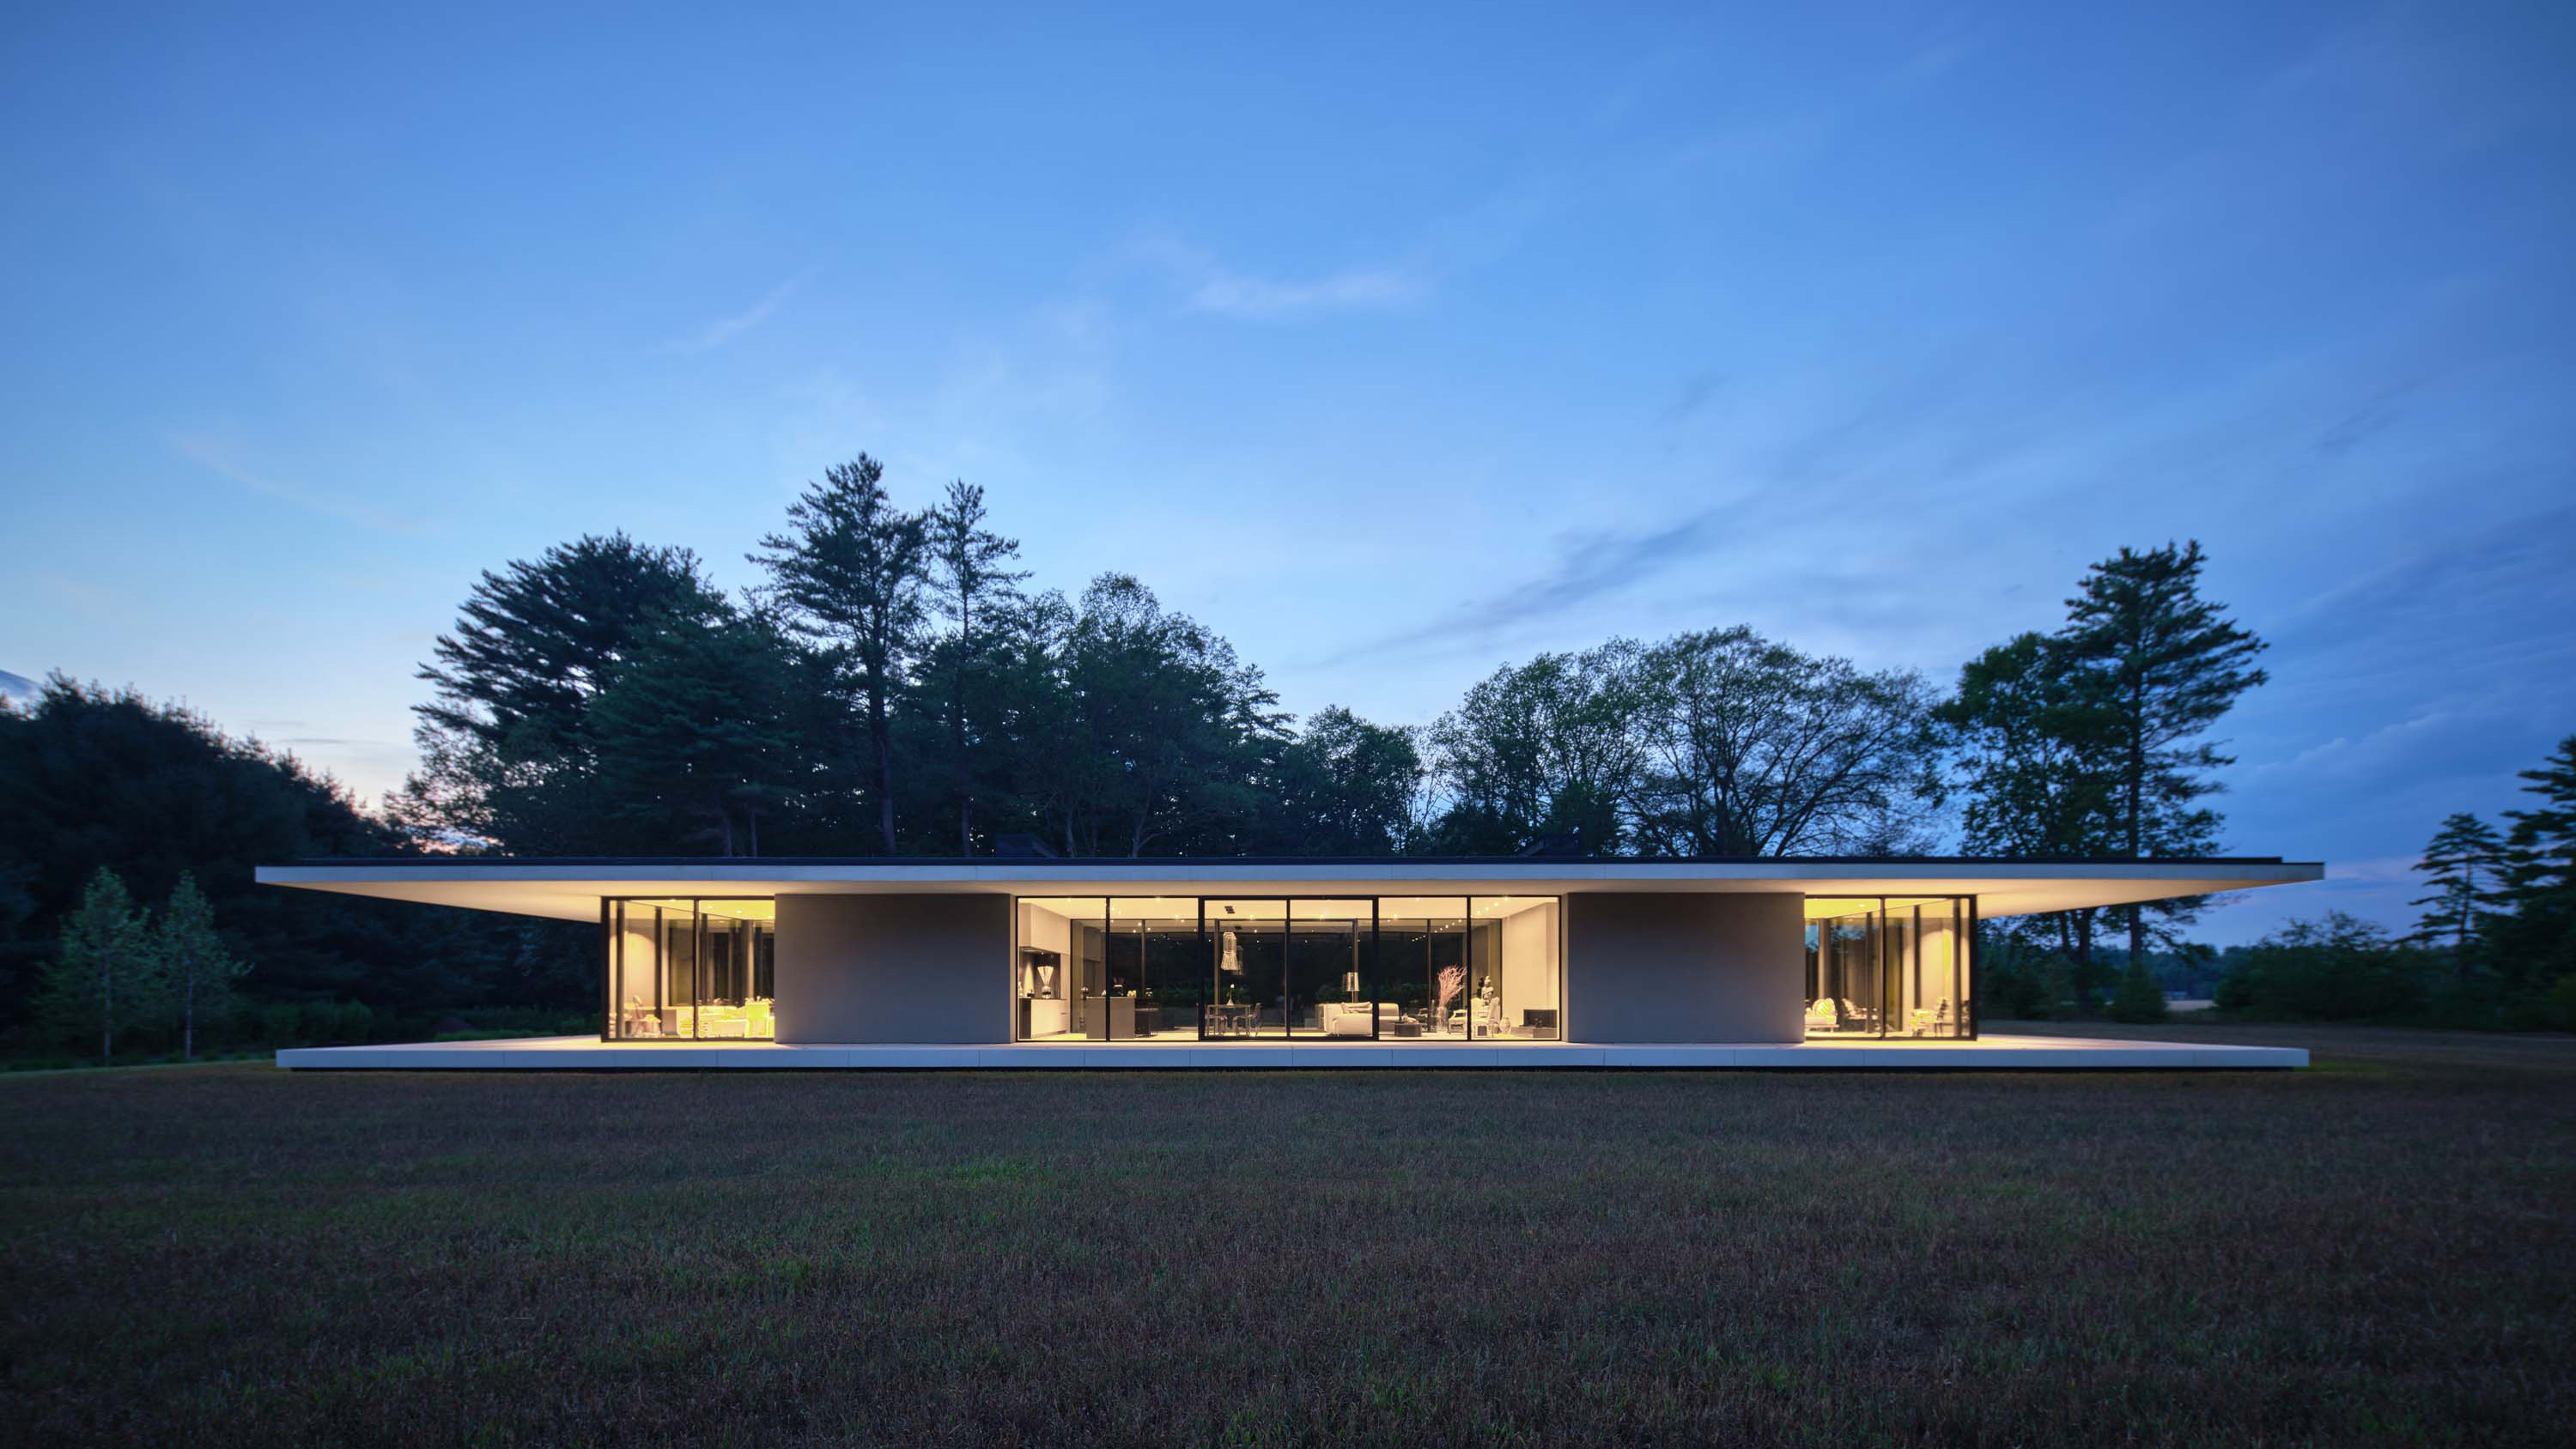 Exterior photo of the Casa Annunziata Residence by Specht Novak Architects. Shot at dusk by Dror Baldinger featuring the symmetrical single-story pavilion with a thin floating roof that cantilevers 15’ from the perimeter walls.